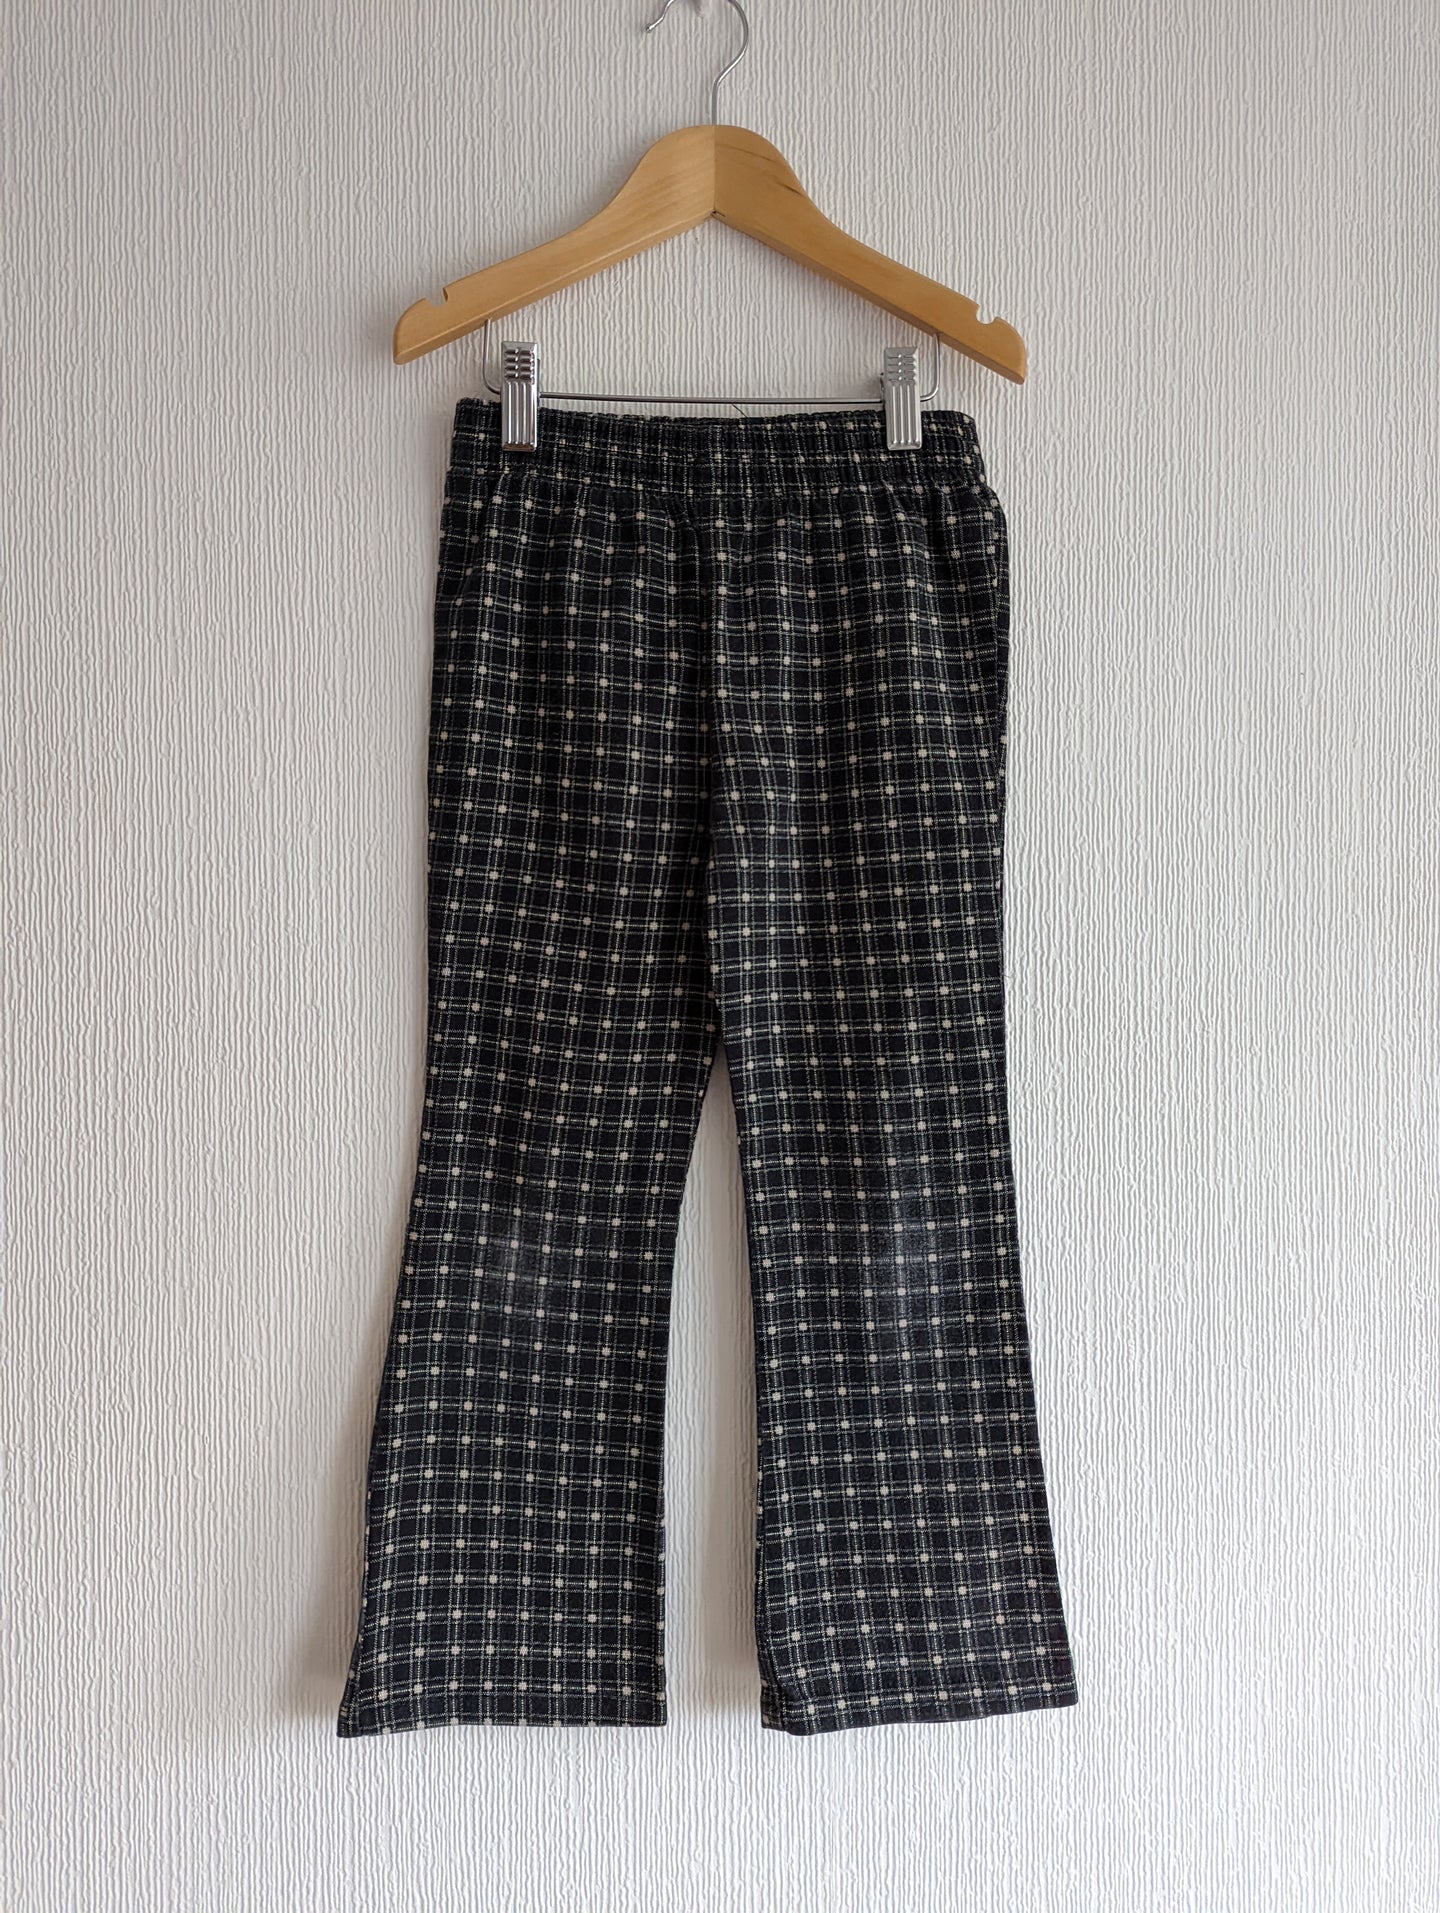 French Vintage Geo Print Trousers - 5 Years